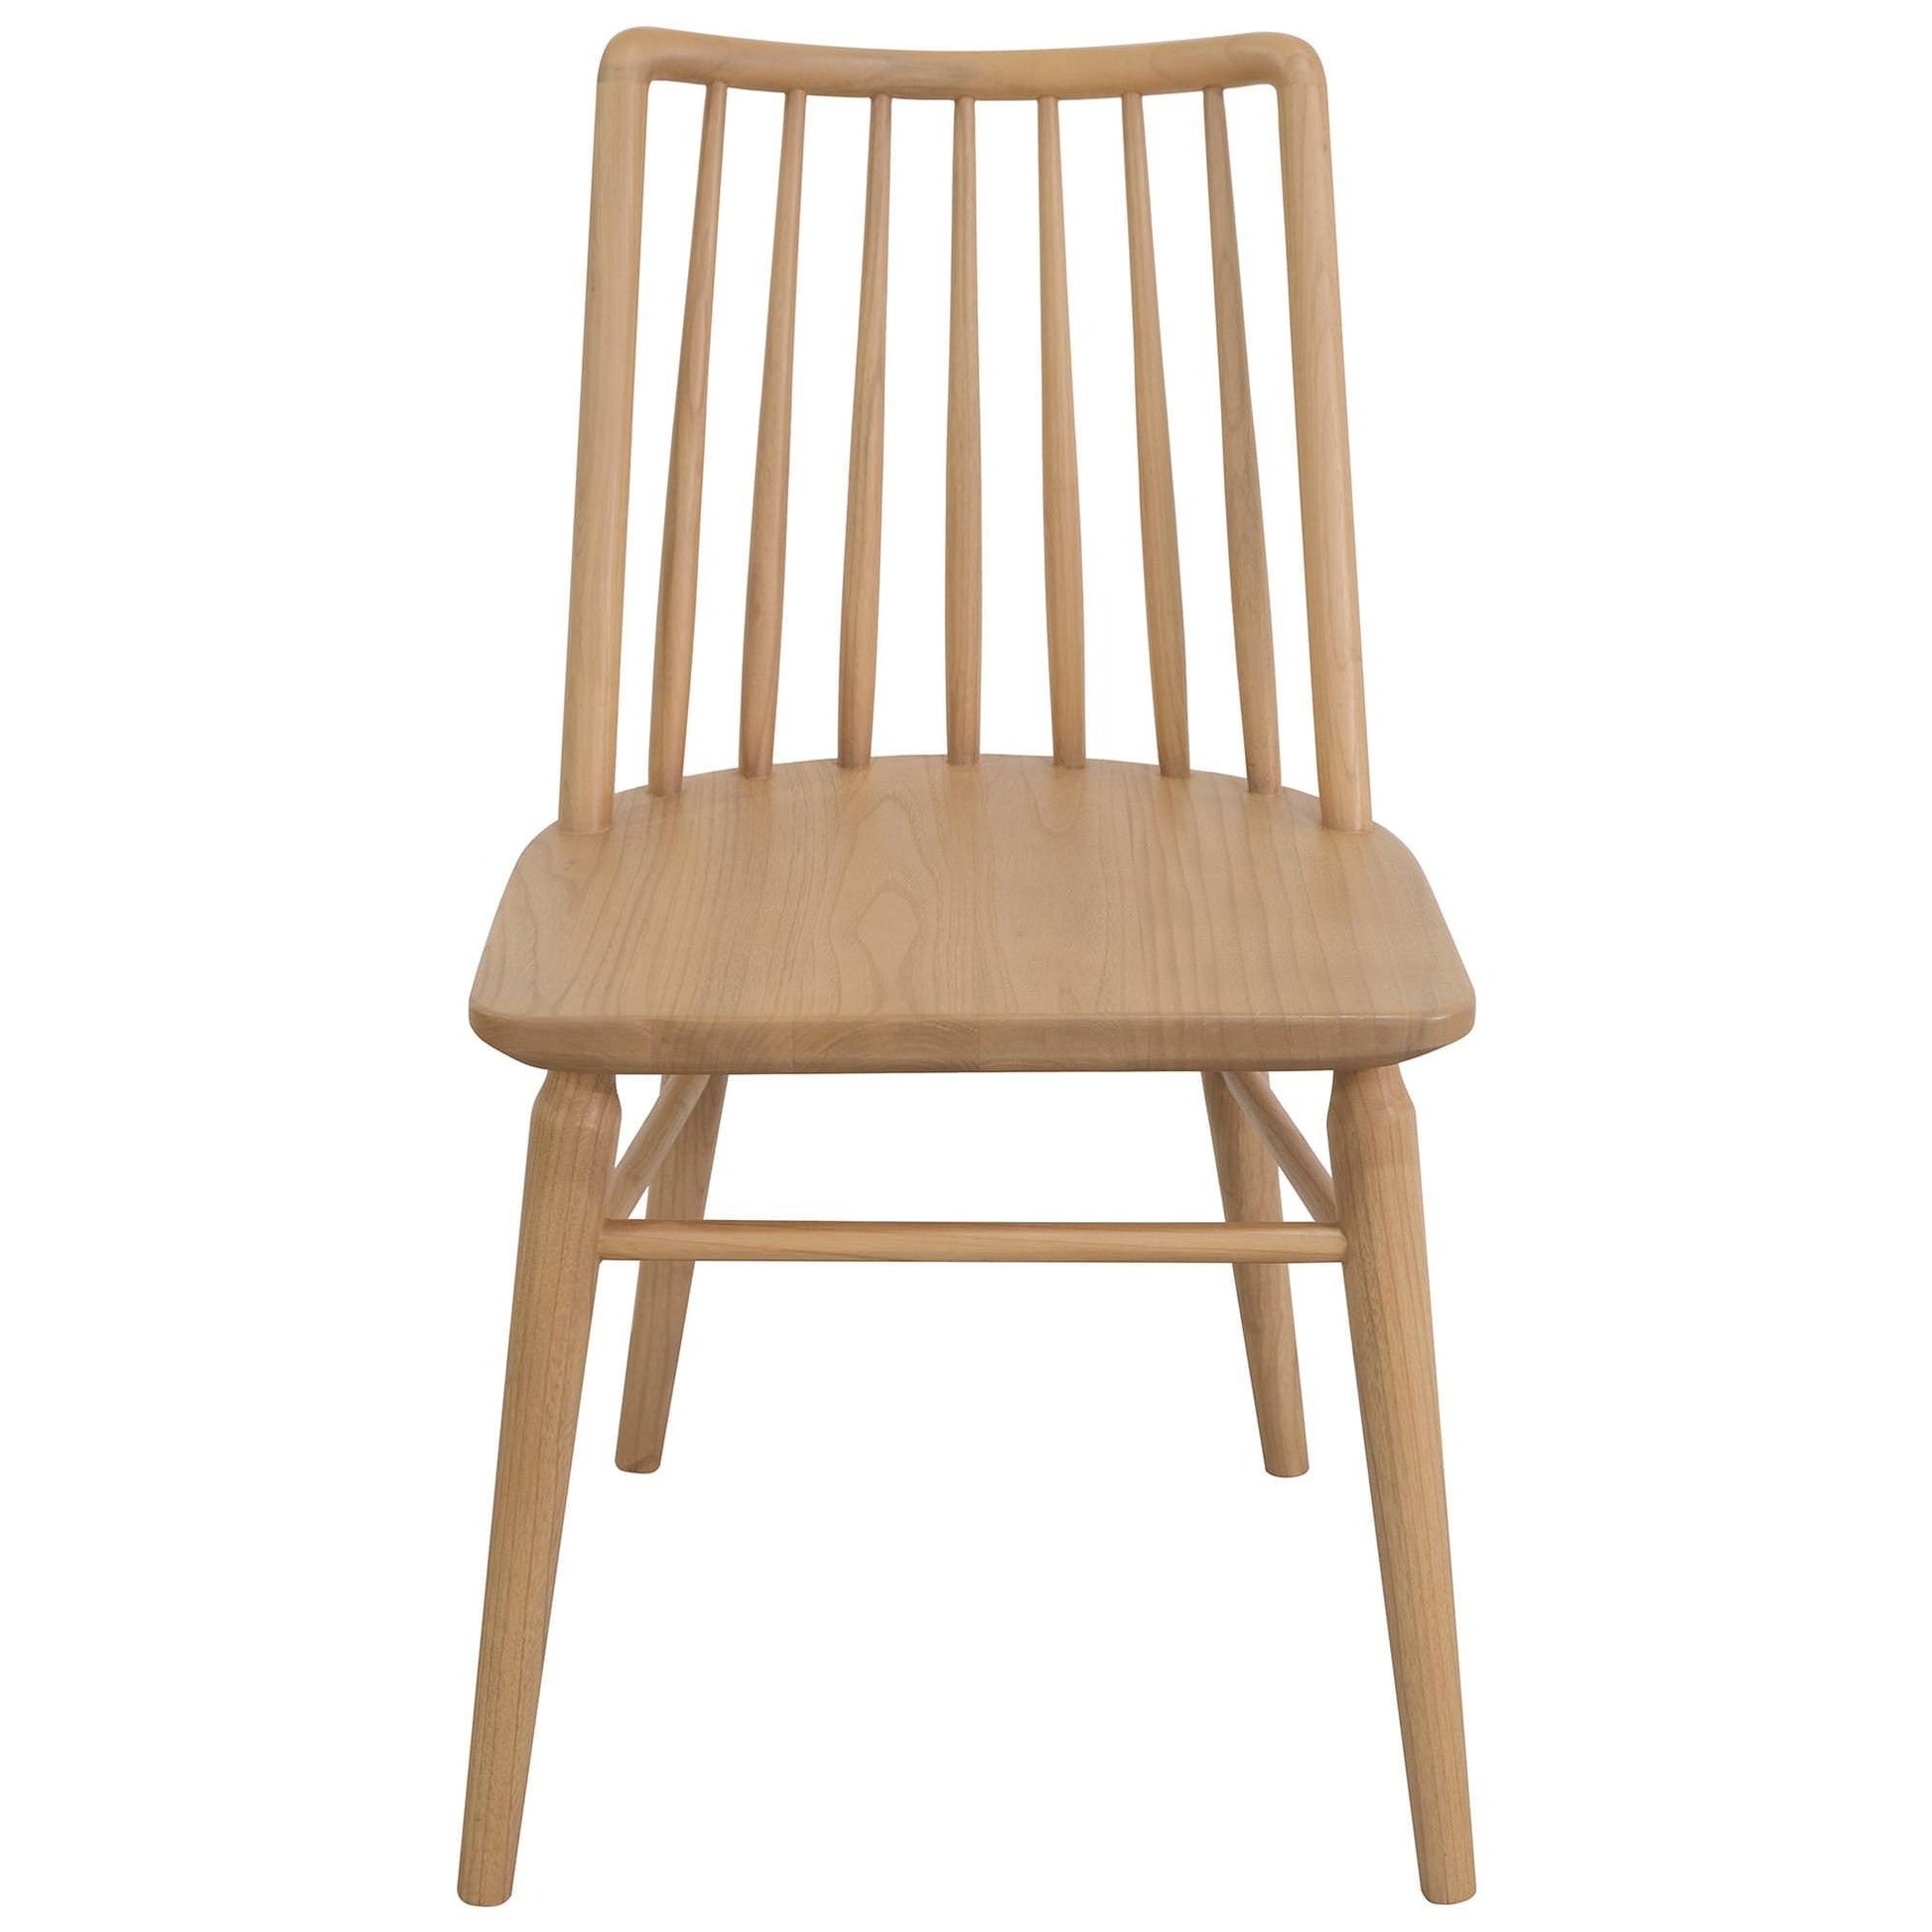 Riviera Solid Oak Dining Chair - Set fo 2 (Natural) - Dining ChairCH 050 RVR Set of 2 (N)754169483524 1